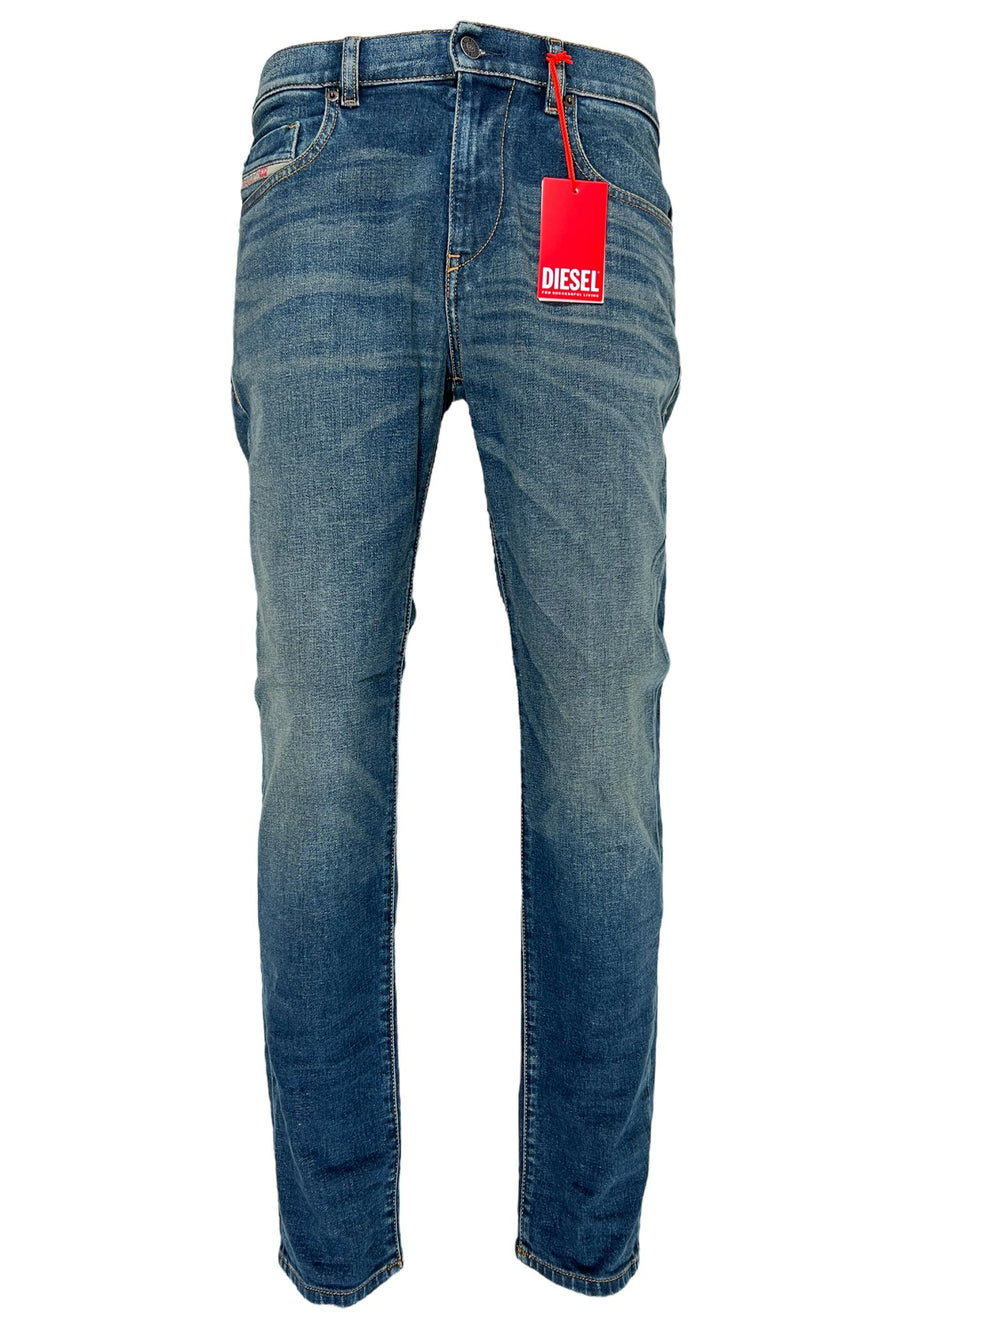 A pair of DIESEL 1979 SLEENKER 9H69 DENIM skinny style jeans with a red tag on them.